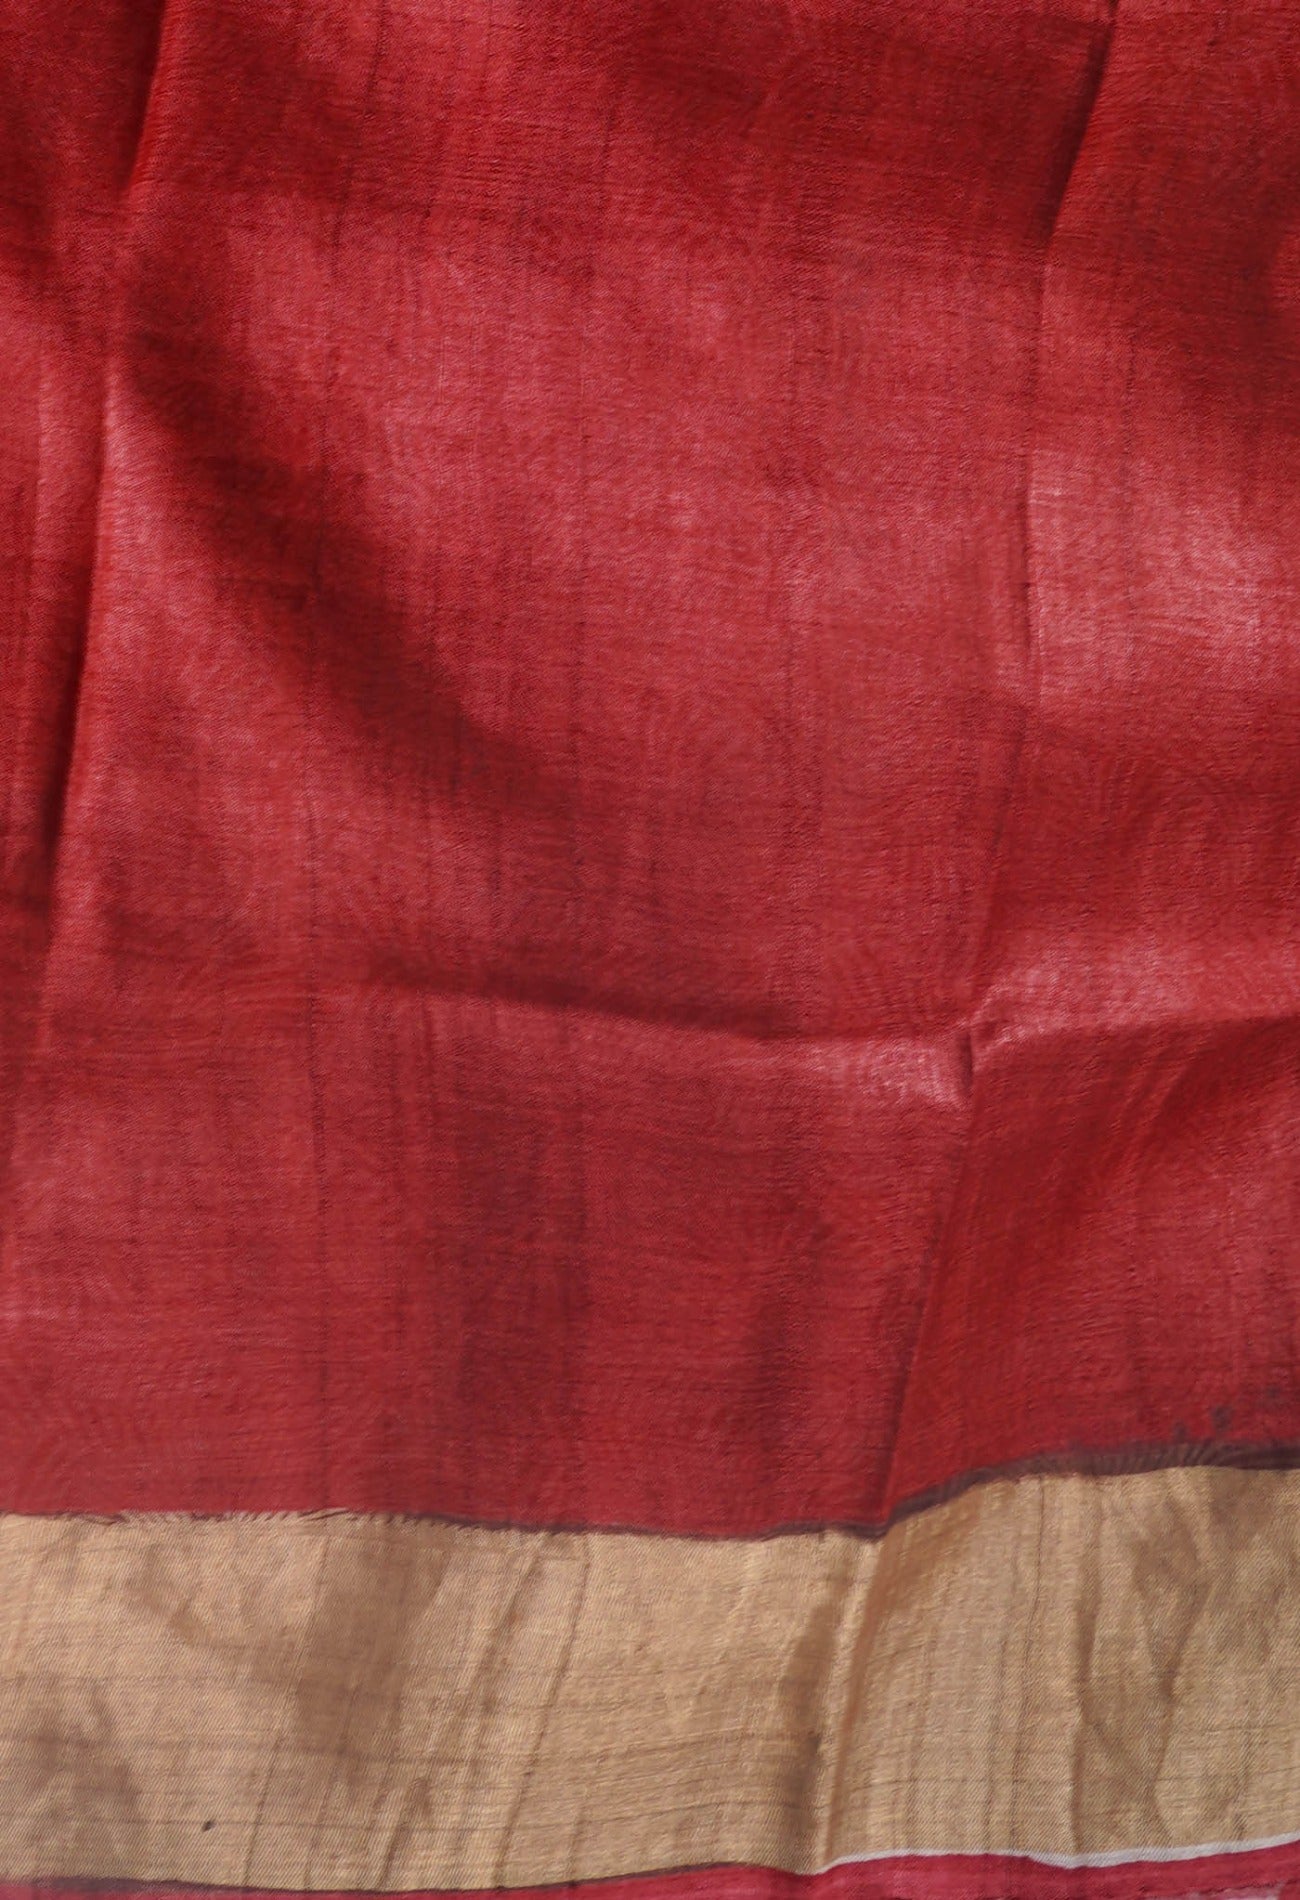 Online Shopping for Rust Orange Pure Handloom Bengal Tussar  Silk Saree with Embroidery from Chhattisgarh at Unnatisilks.com India
